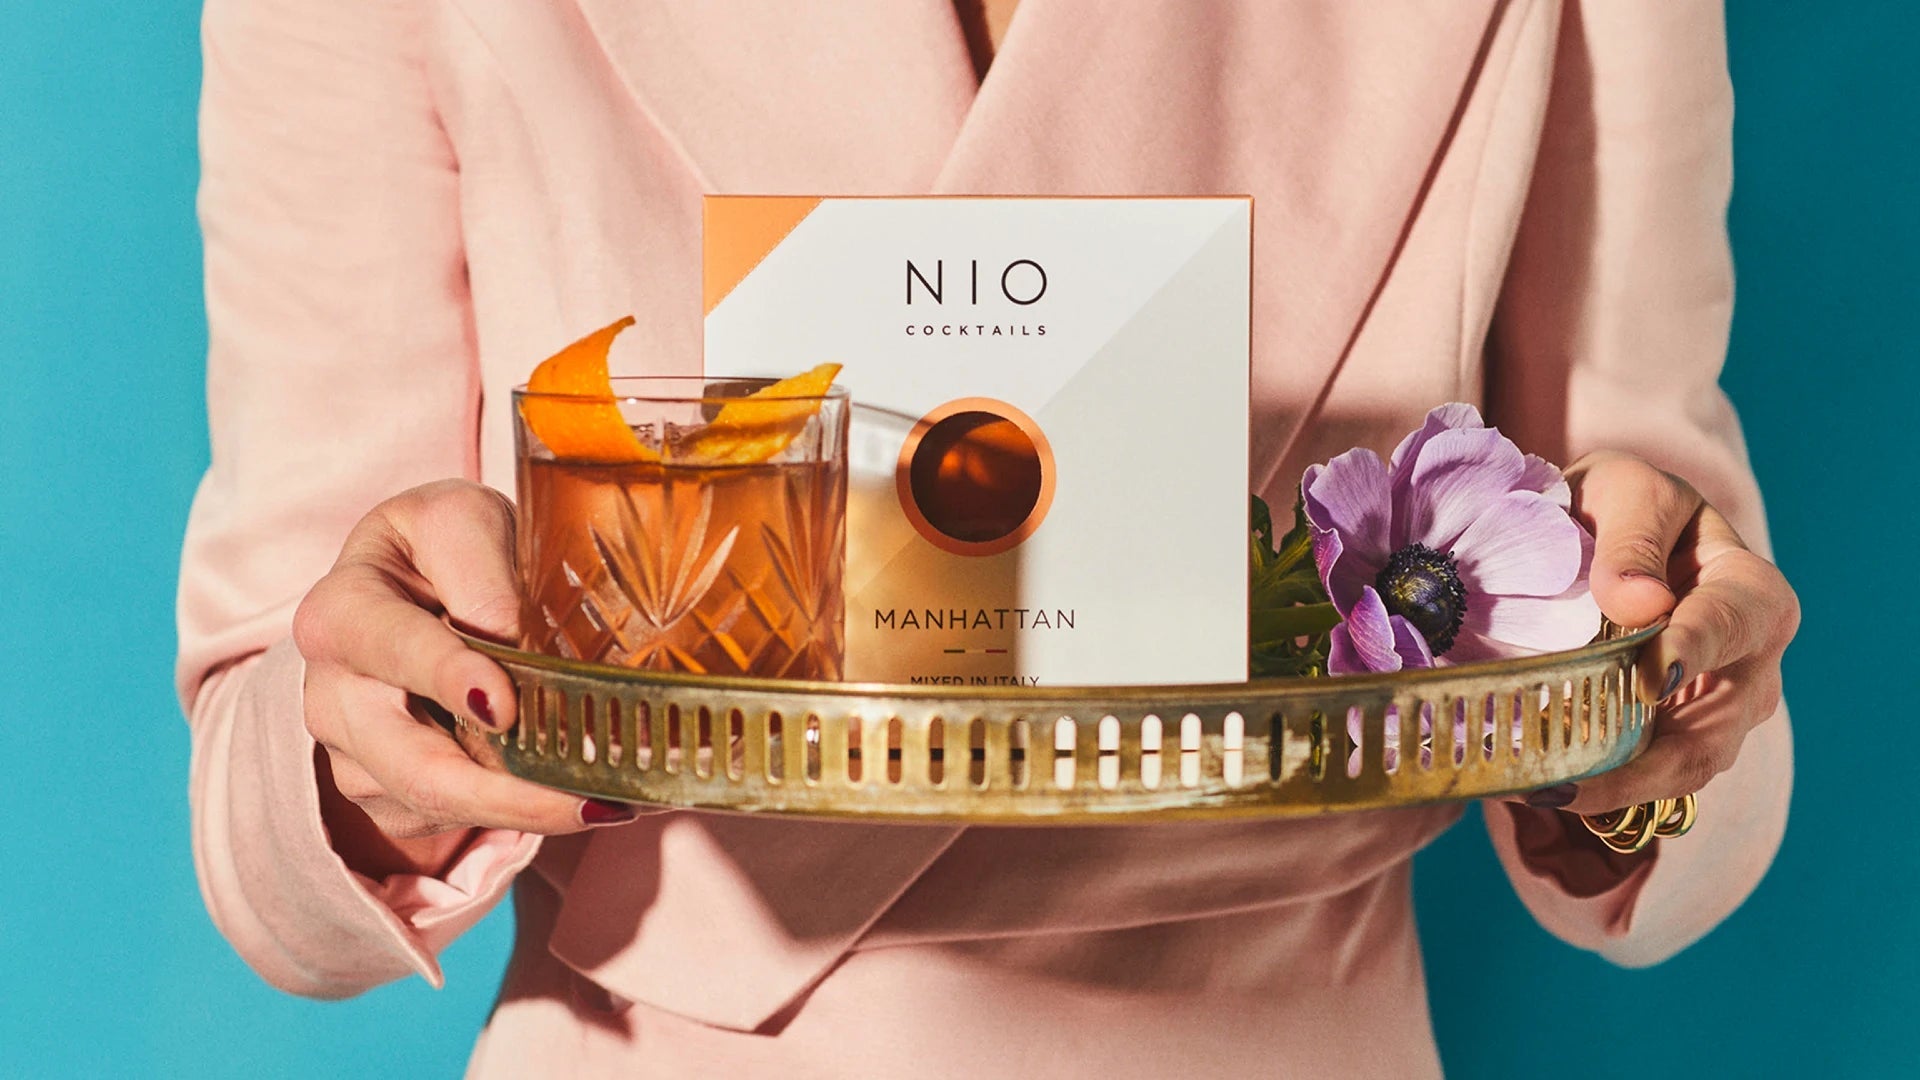 elegant lady in pink serving a nio cocktail manhattan on a tray